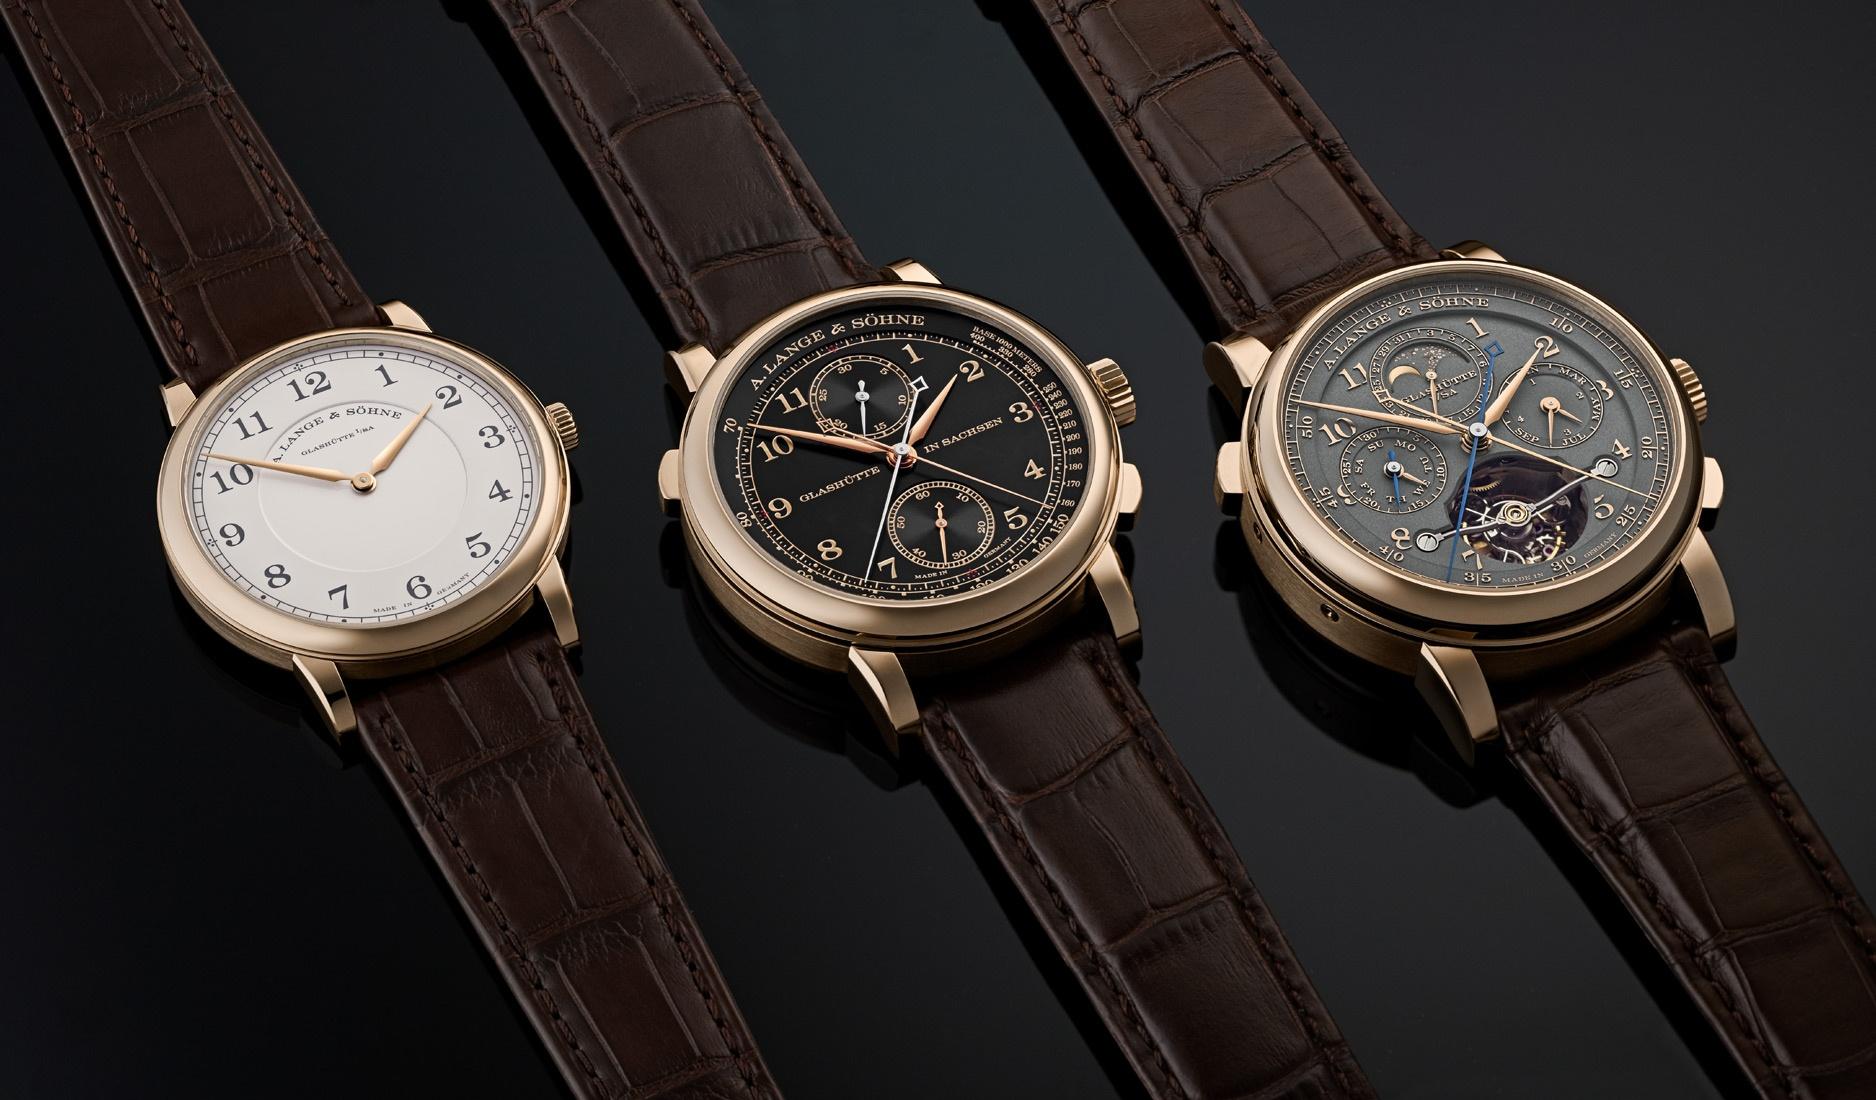 A. Lange & Söhne 175th Anniversary Special Edition ‘Homage to F. A. Lange’